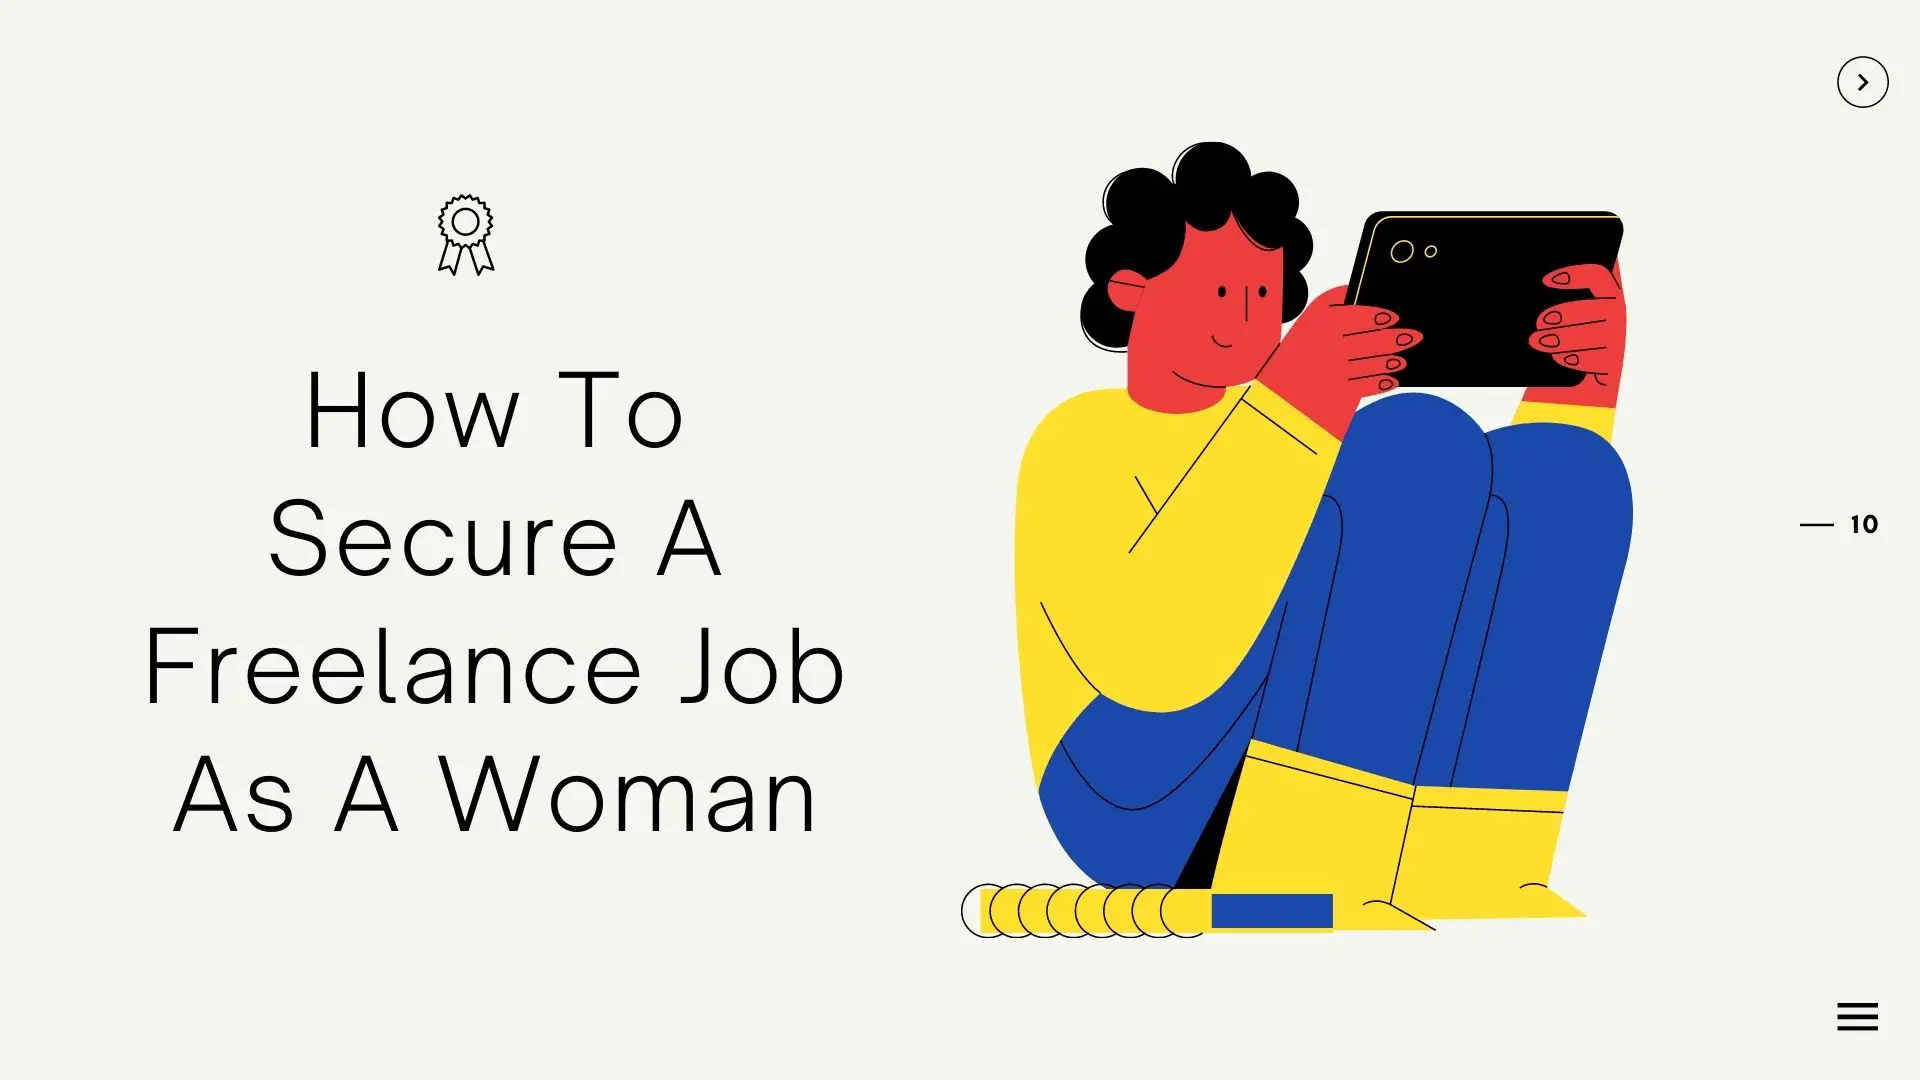 How To Secure A Freelance Job As A Woman